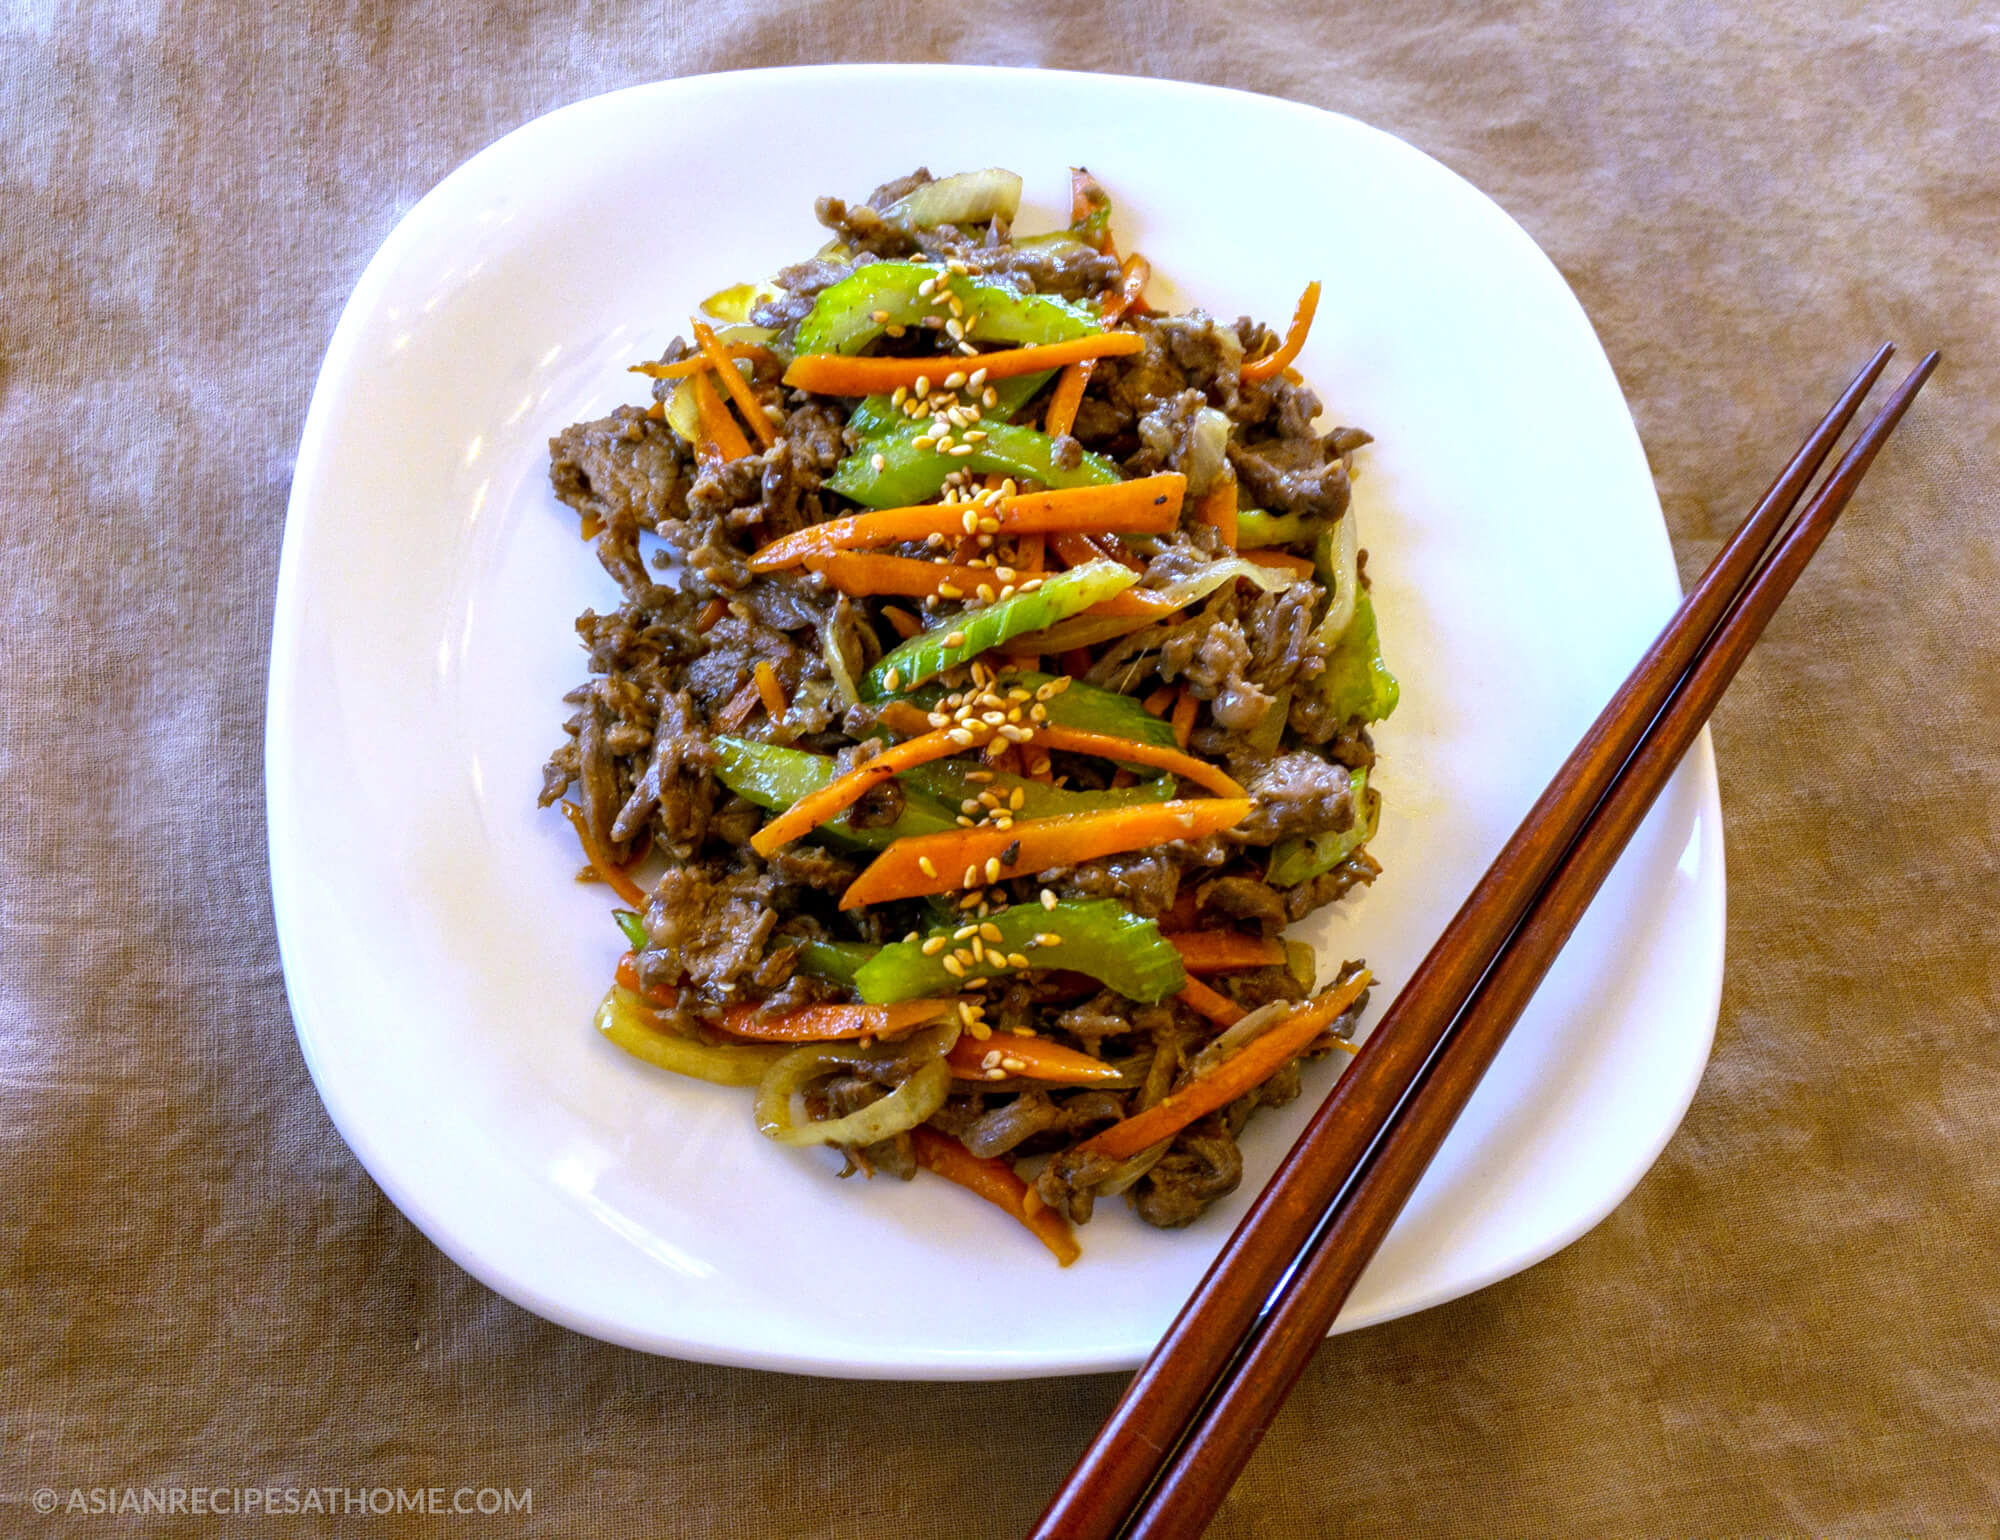 Asian Beef Stir Fry - This is an Asian-inspired simple beef stir fry recipe that has a great blend of savory flavors.